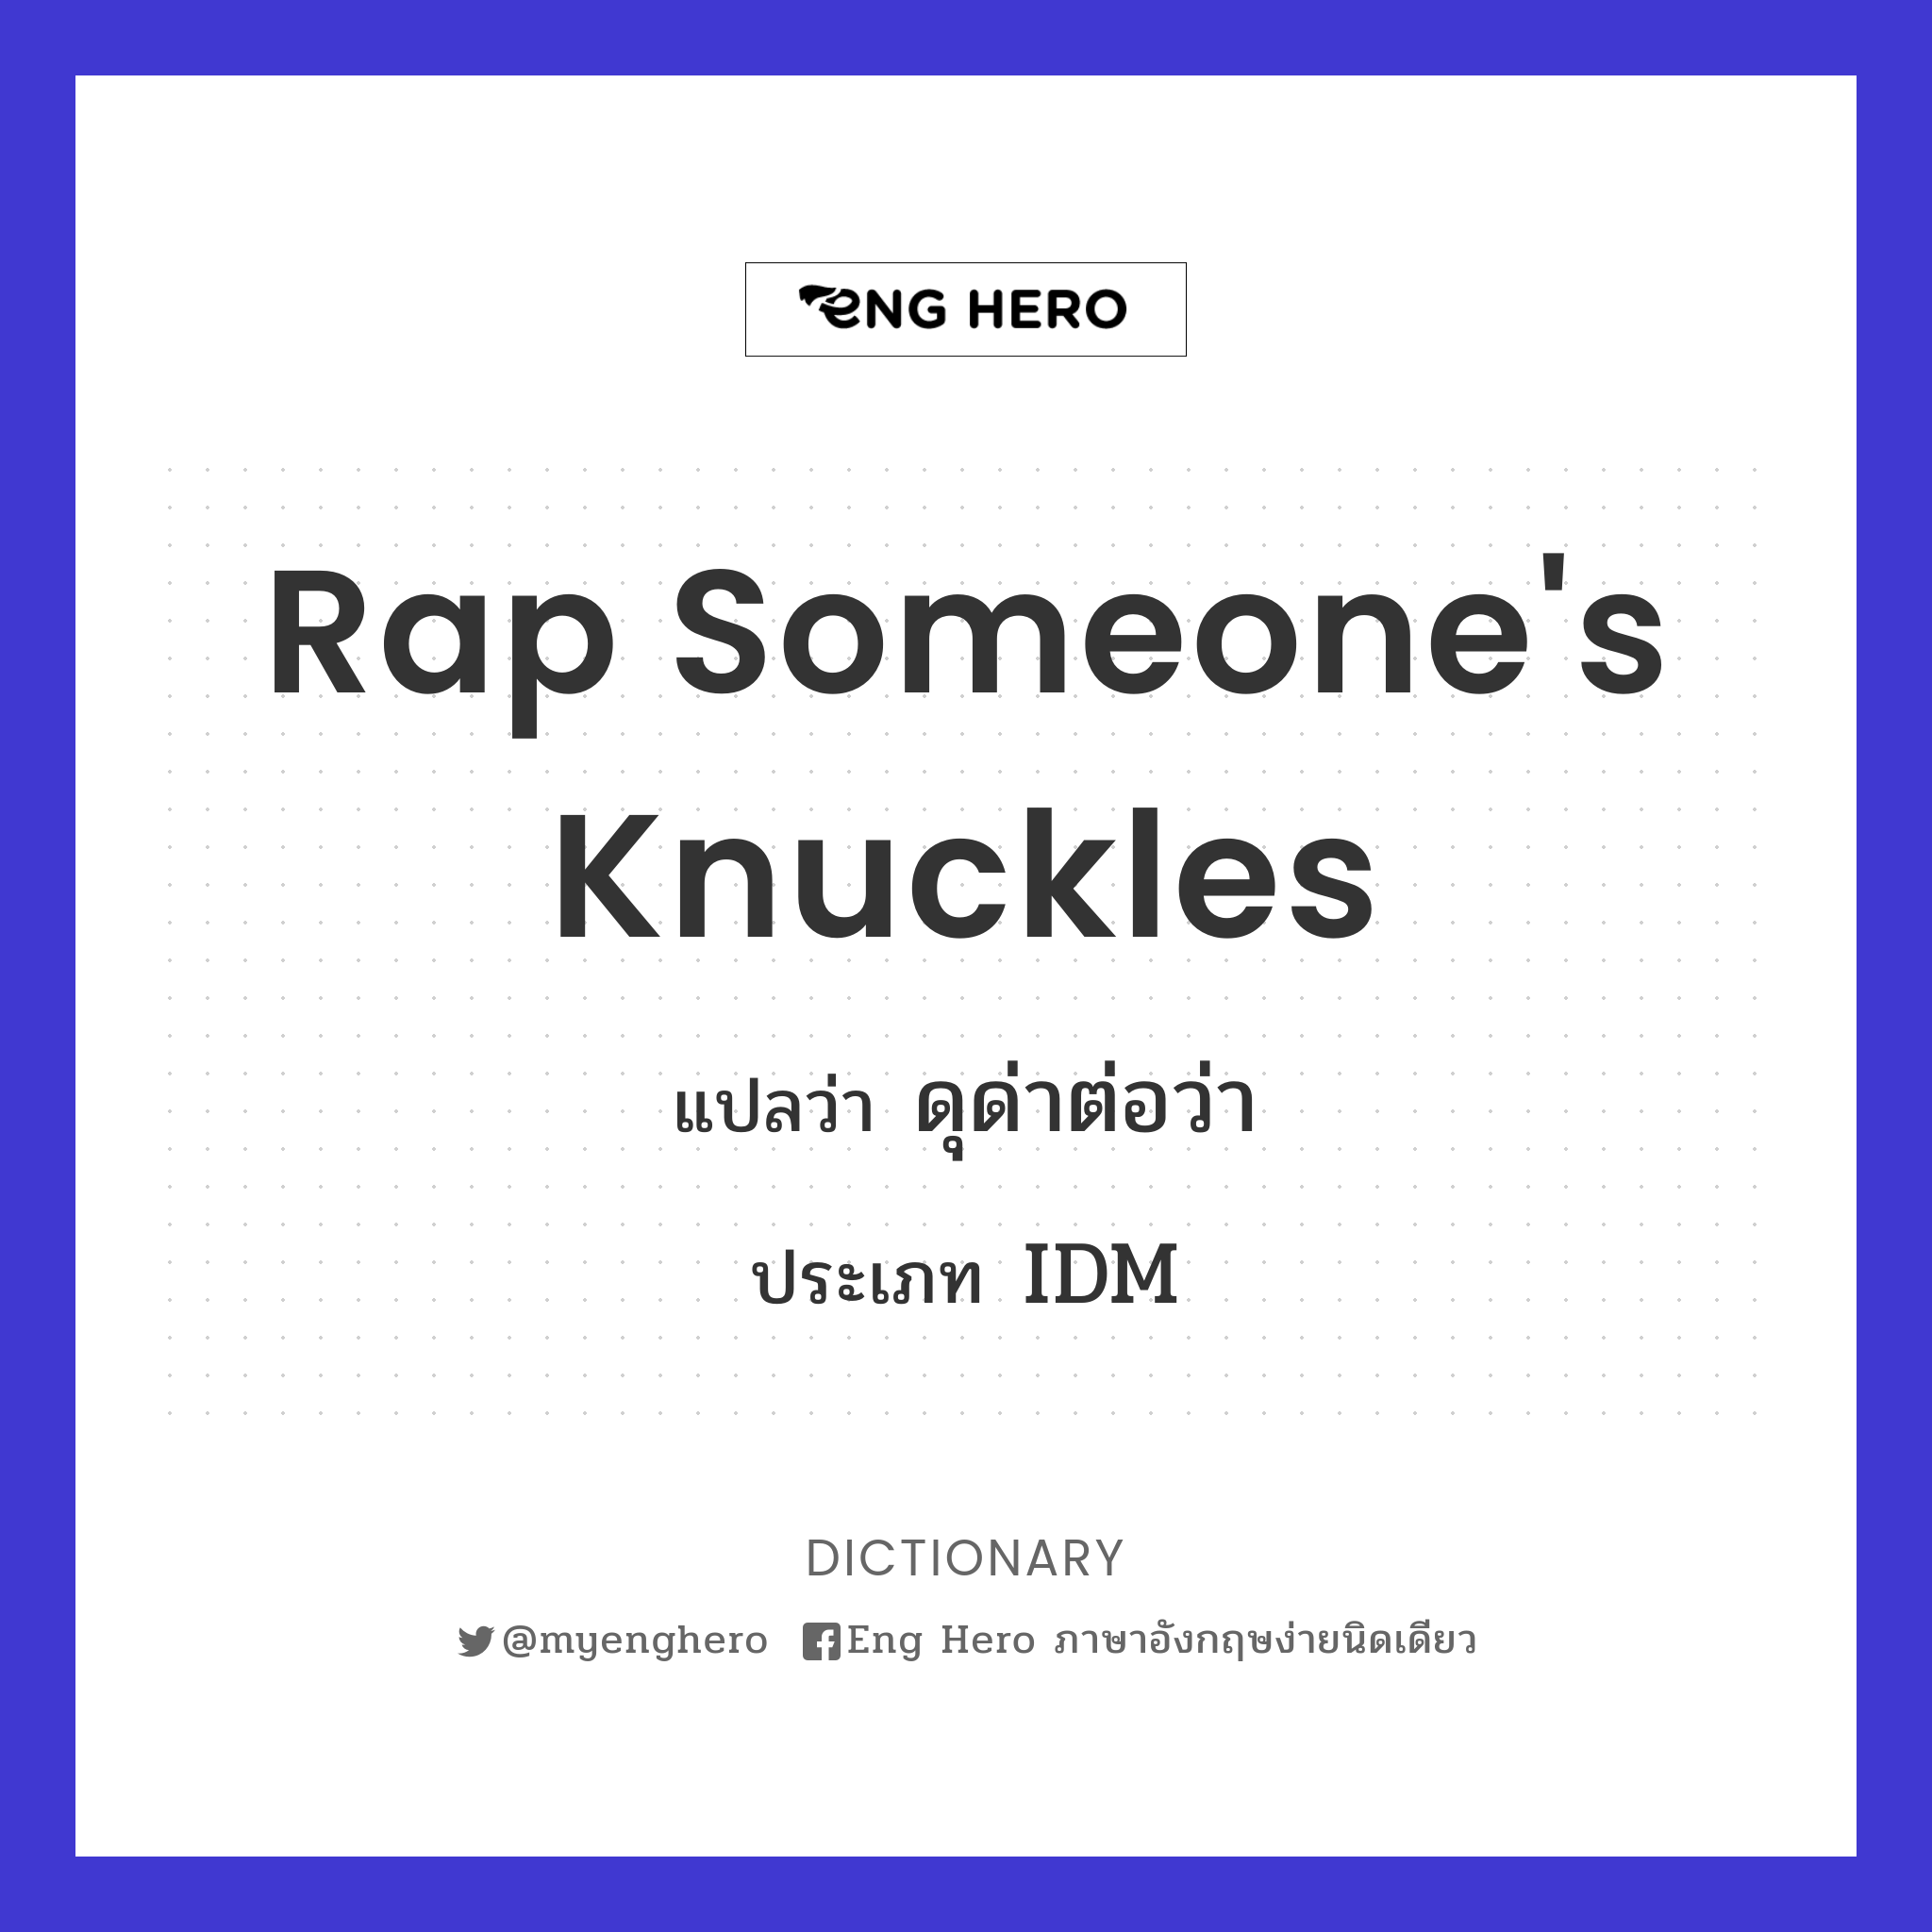 rap someone's knuckles